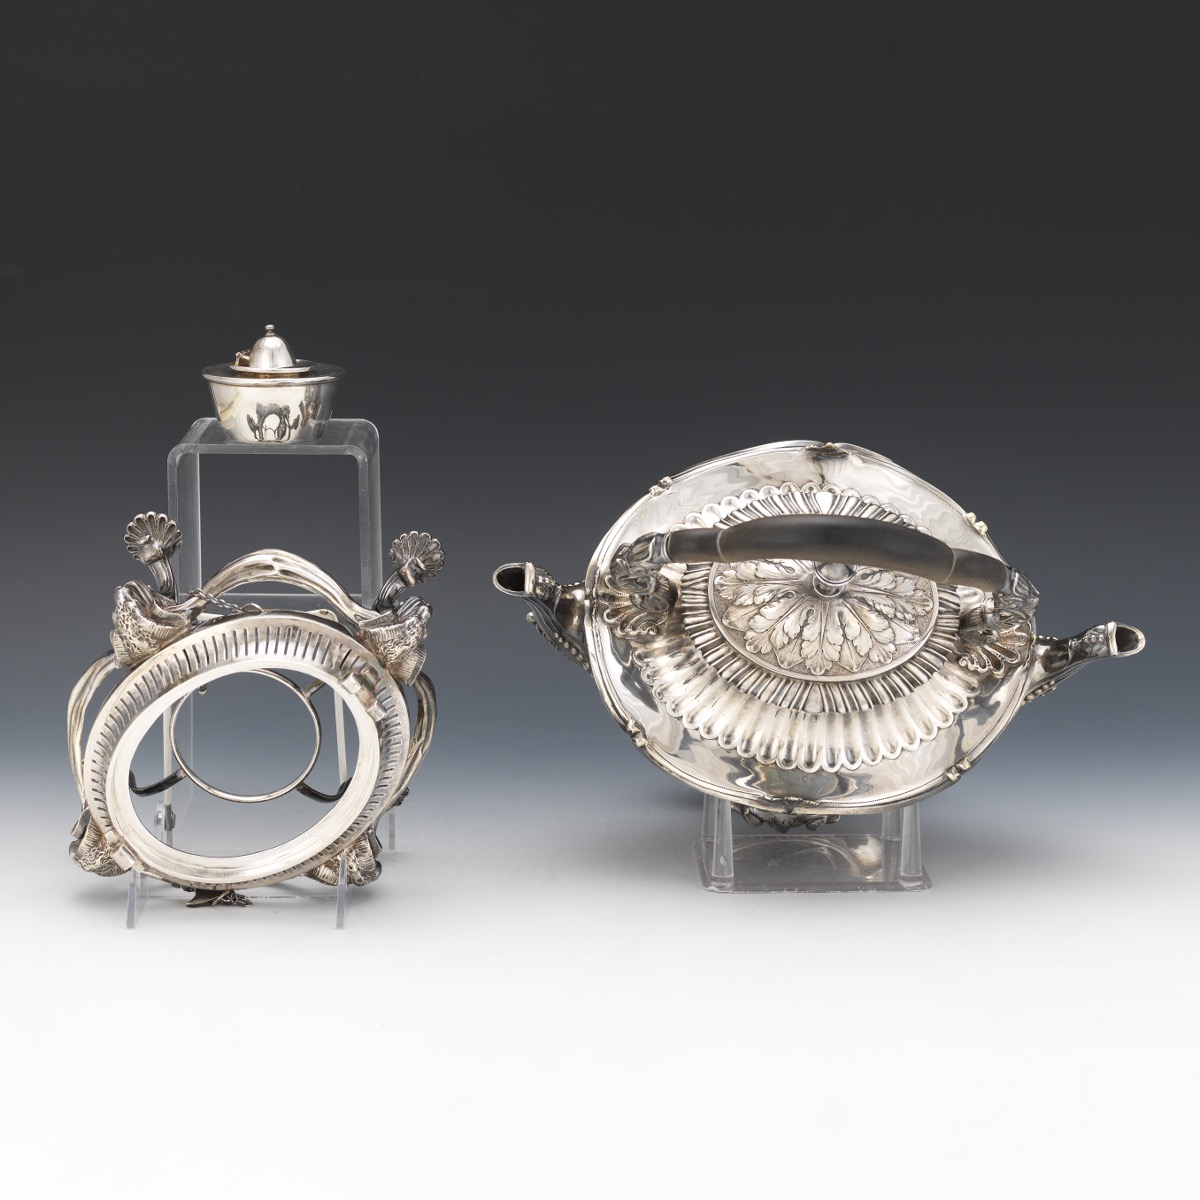 Impressive Sheffield Silver Plated Double Spout Tilted Hot Water Kettle, ca. late 19th Century - Image 8 of 9